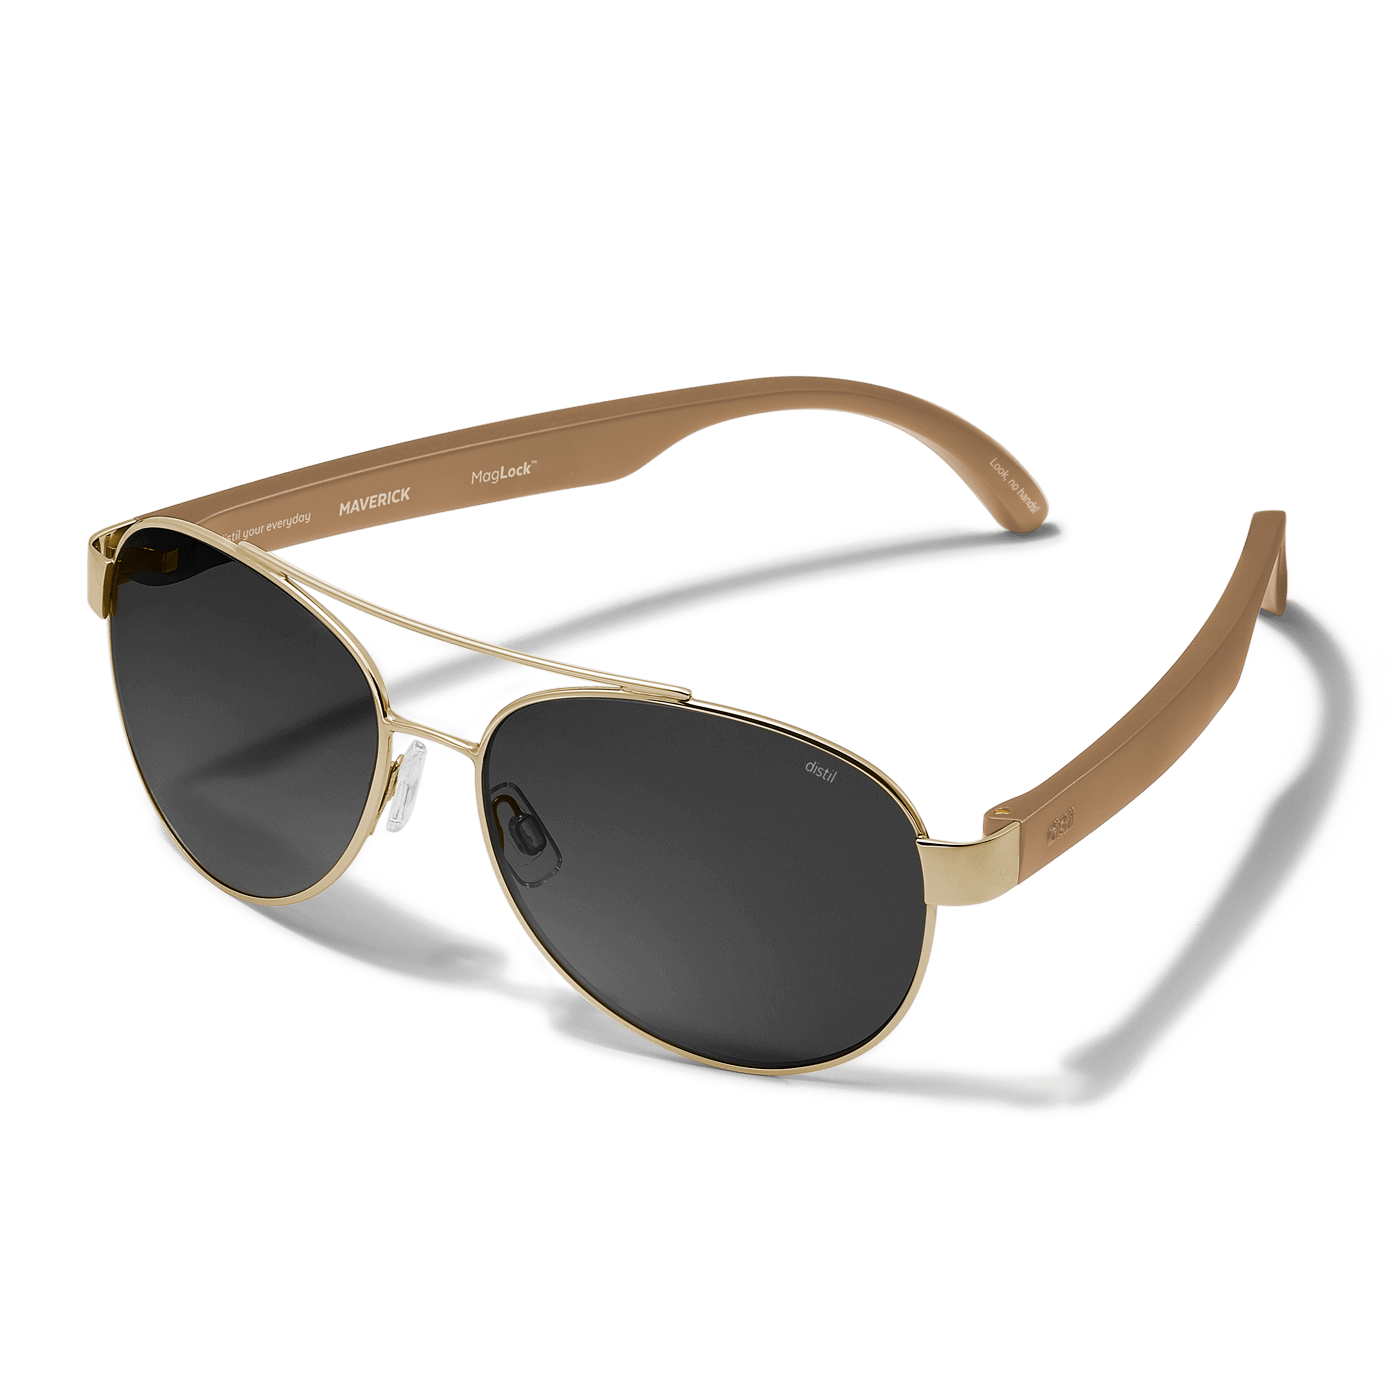 Distil Union Titanium Maverick MagLock Sunglasses in Gold with Sand Tan flex-to-fit arms and gray polarized lenses